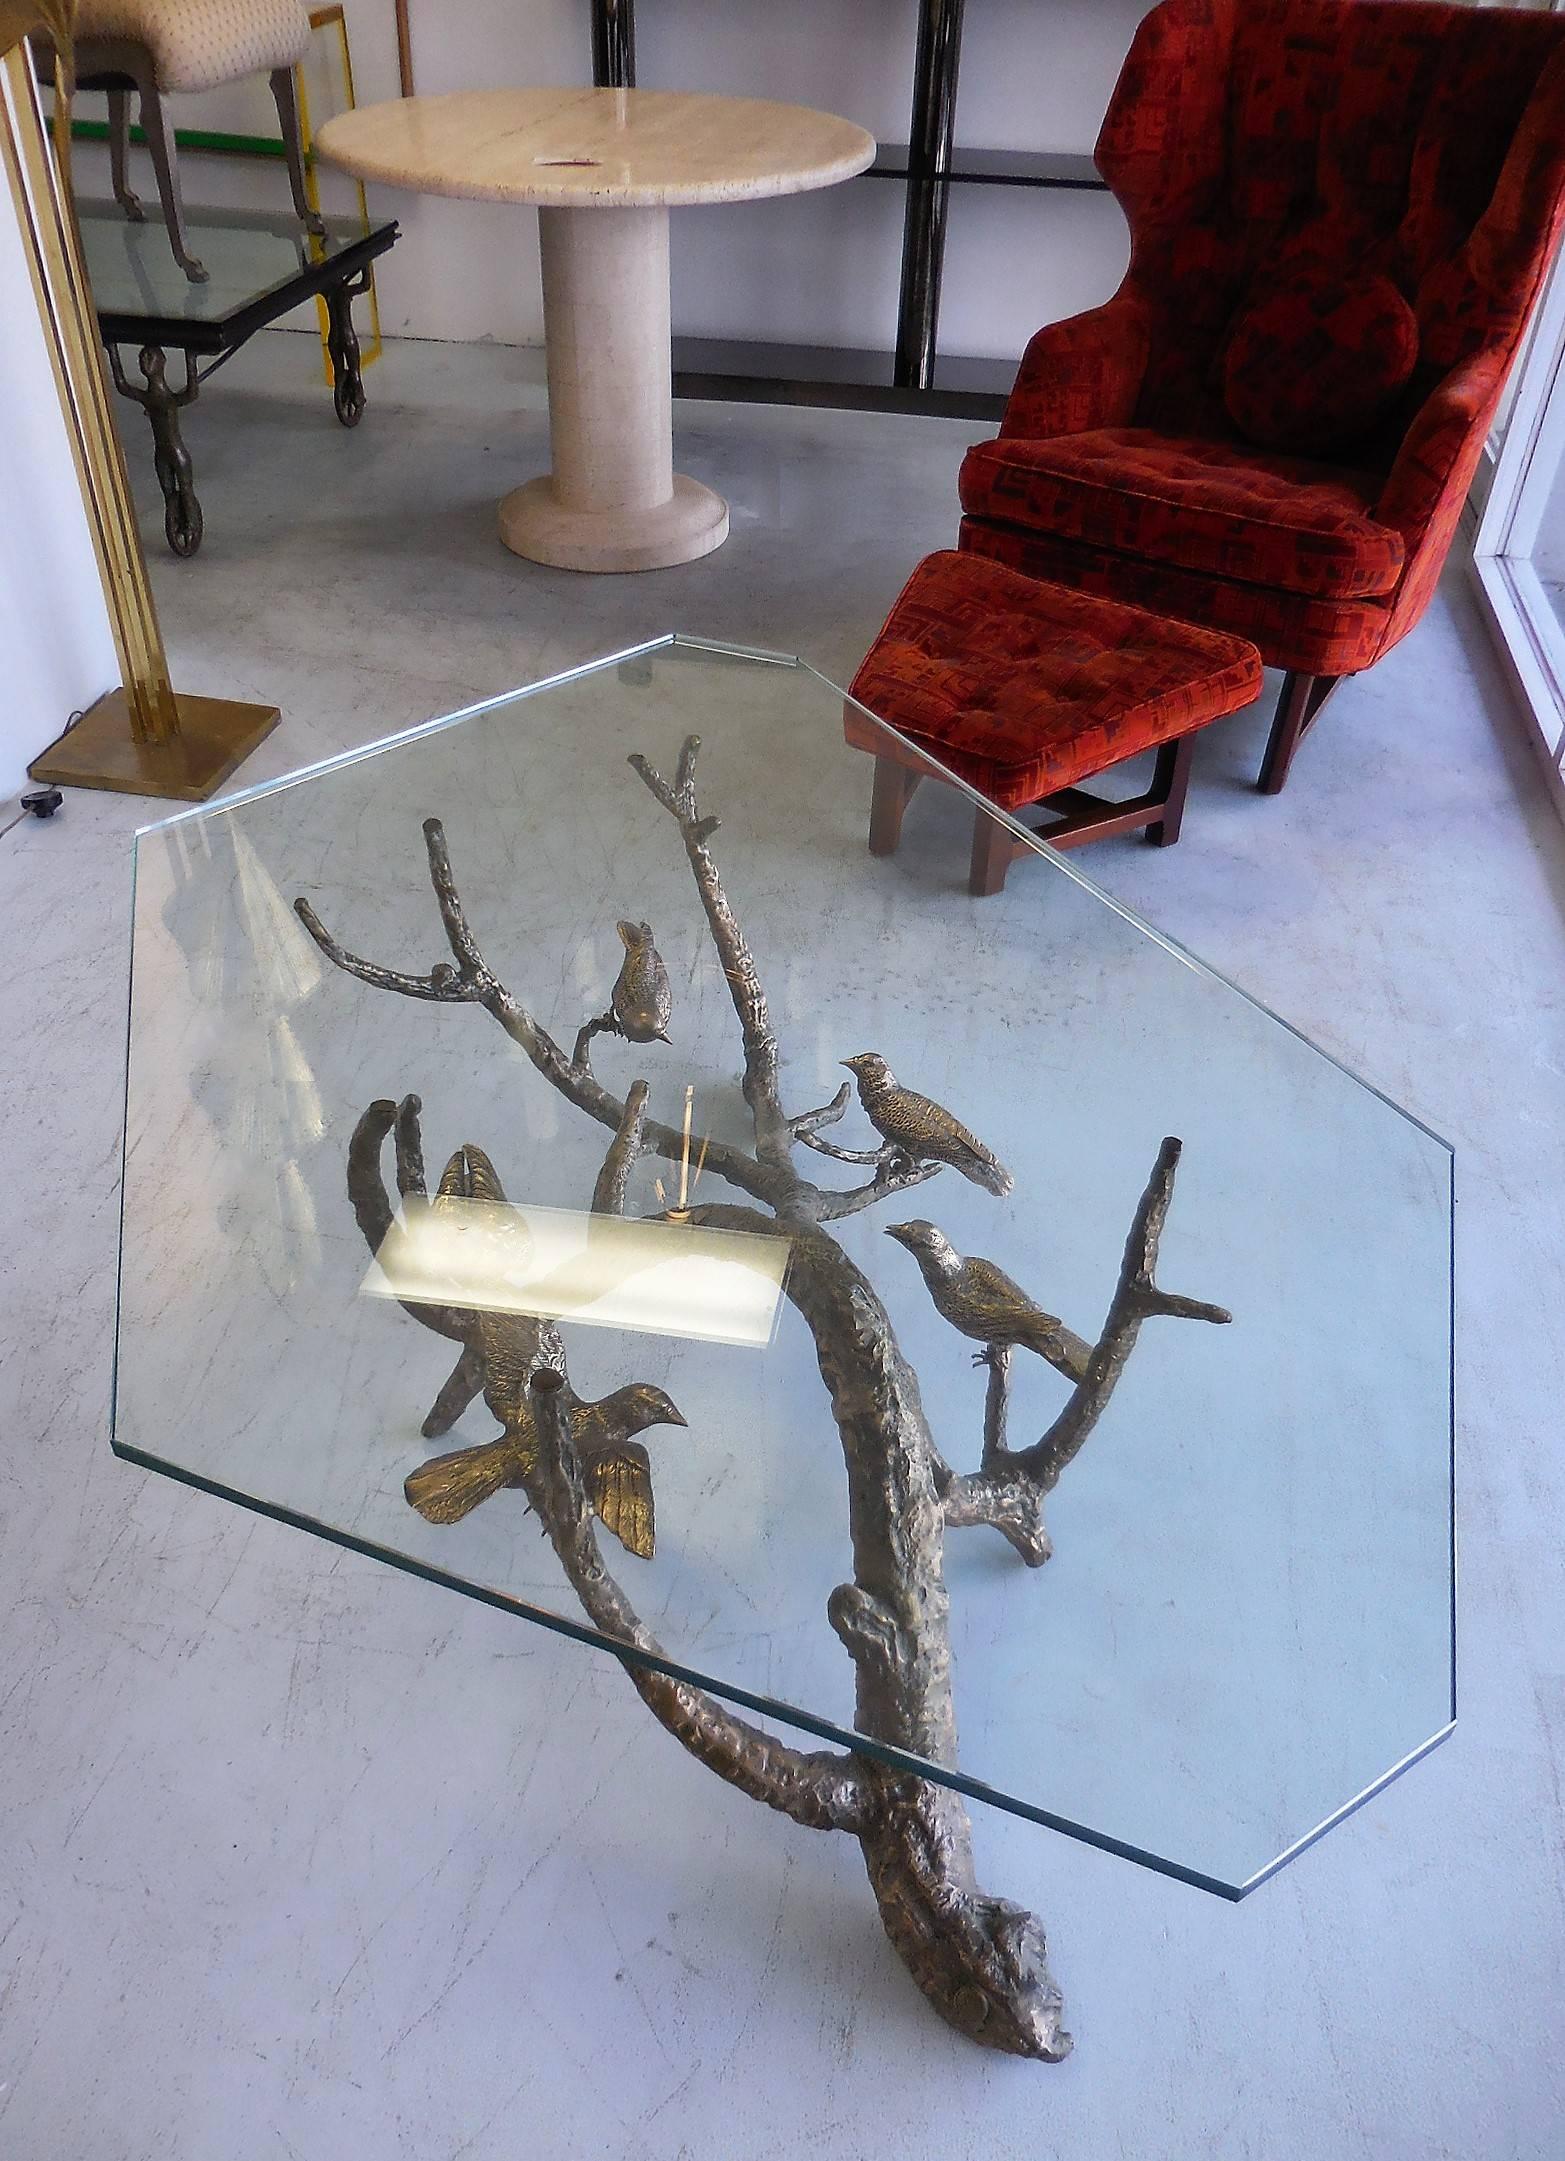 Solid bronze coffee table with asymmetric glass top. An almost surreal depiction of birds perched on a large branch becomes the base for this table.